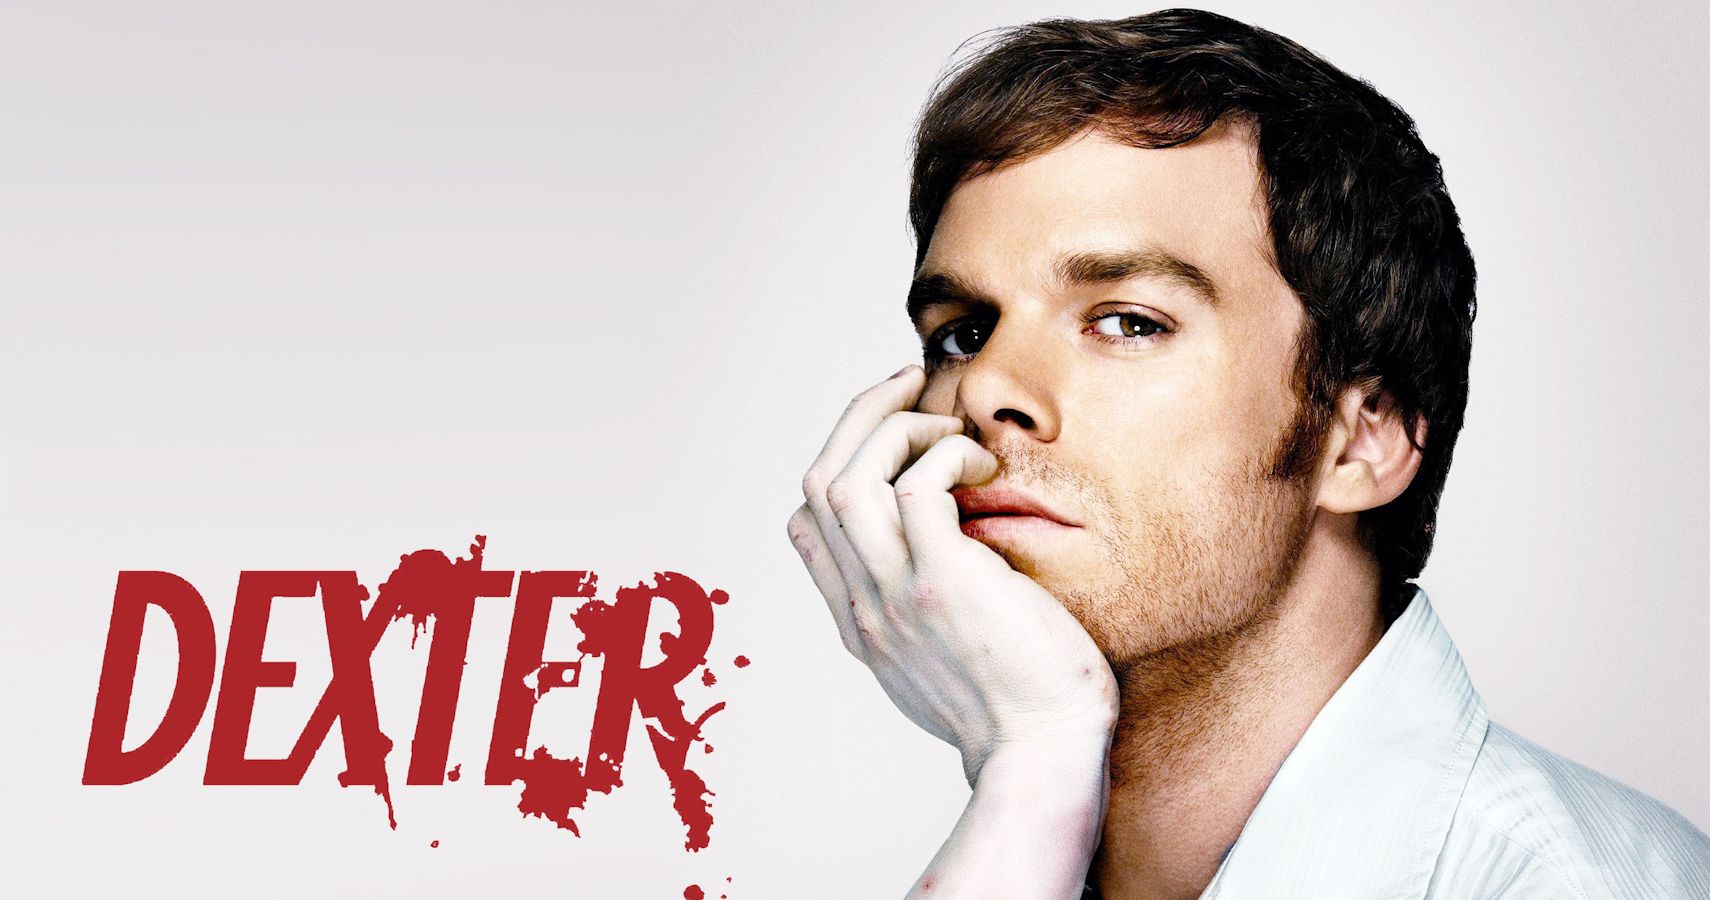 Dexter Every Episode In Season 1, Ranked (According To IMDb)